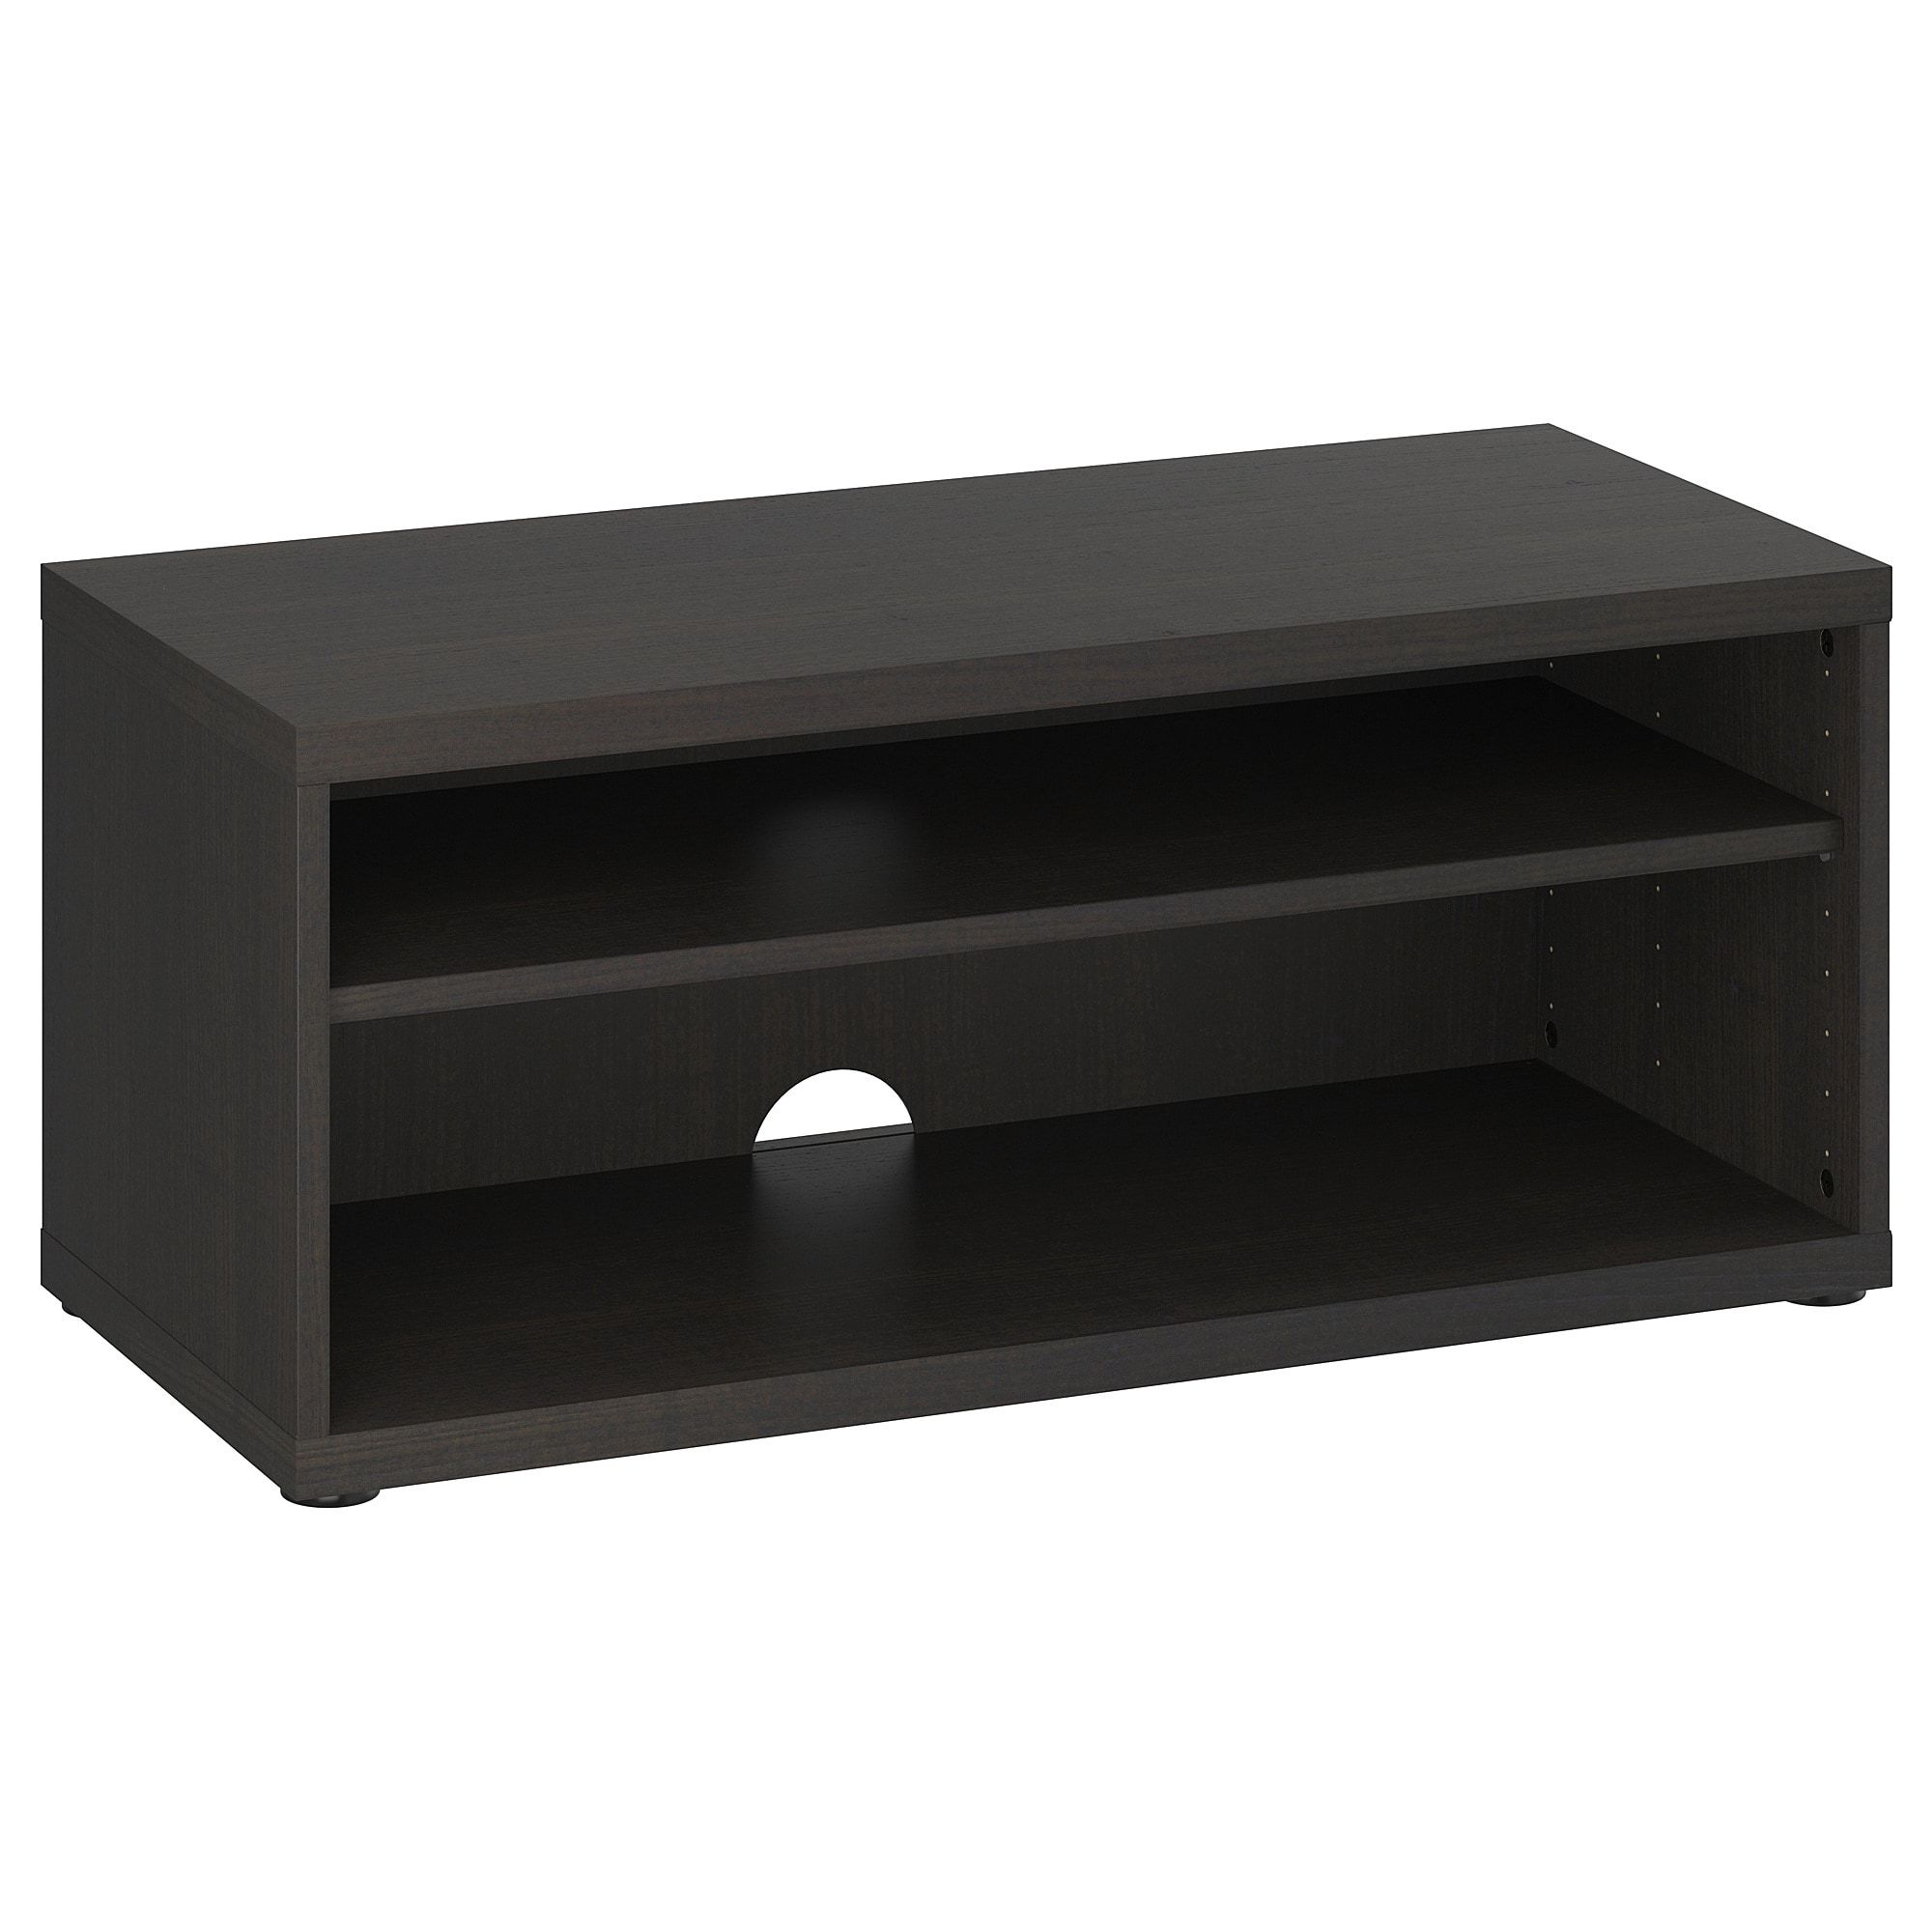 Preferred Tall Black Tv Cabinets Intended For Tv Stands & Tv Units (View 16 of 20)